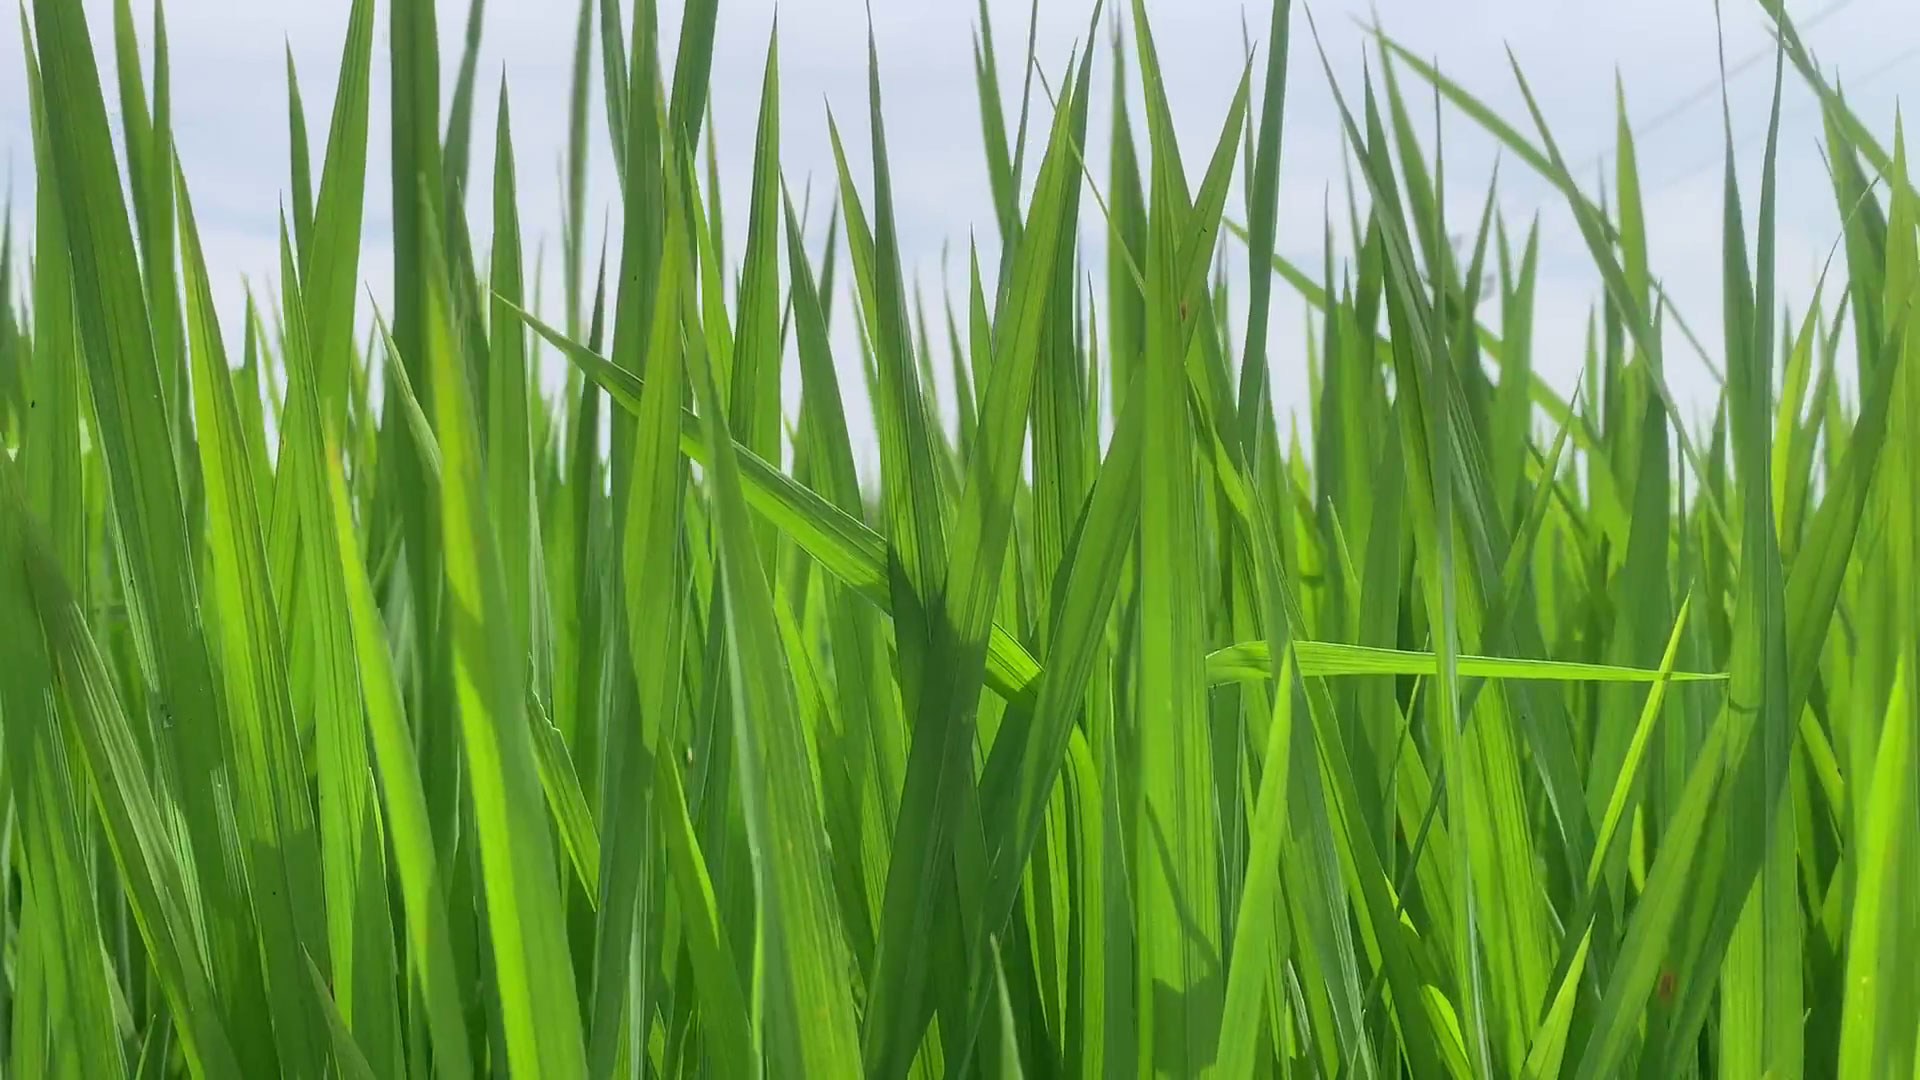 Green Animated Grass Background Video Free Download | All Design Creative